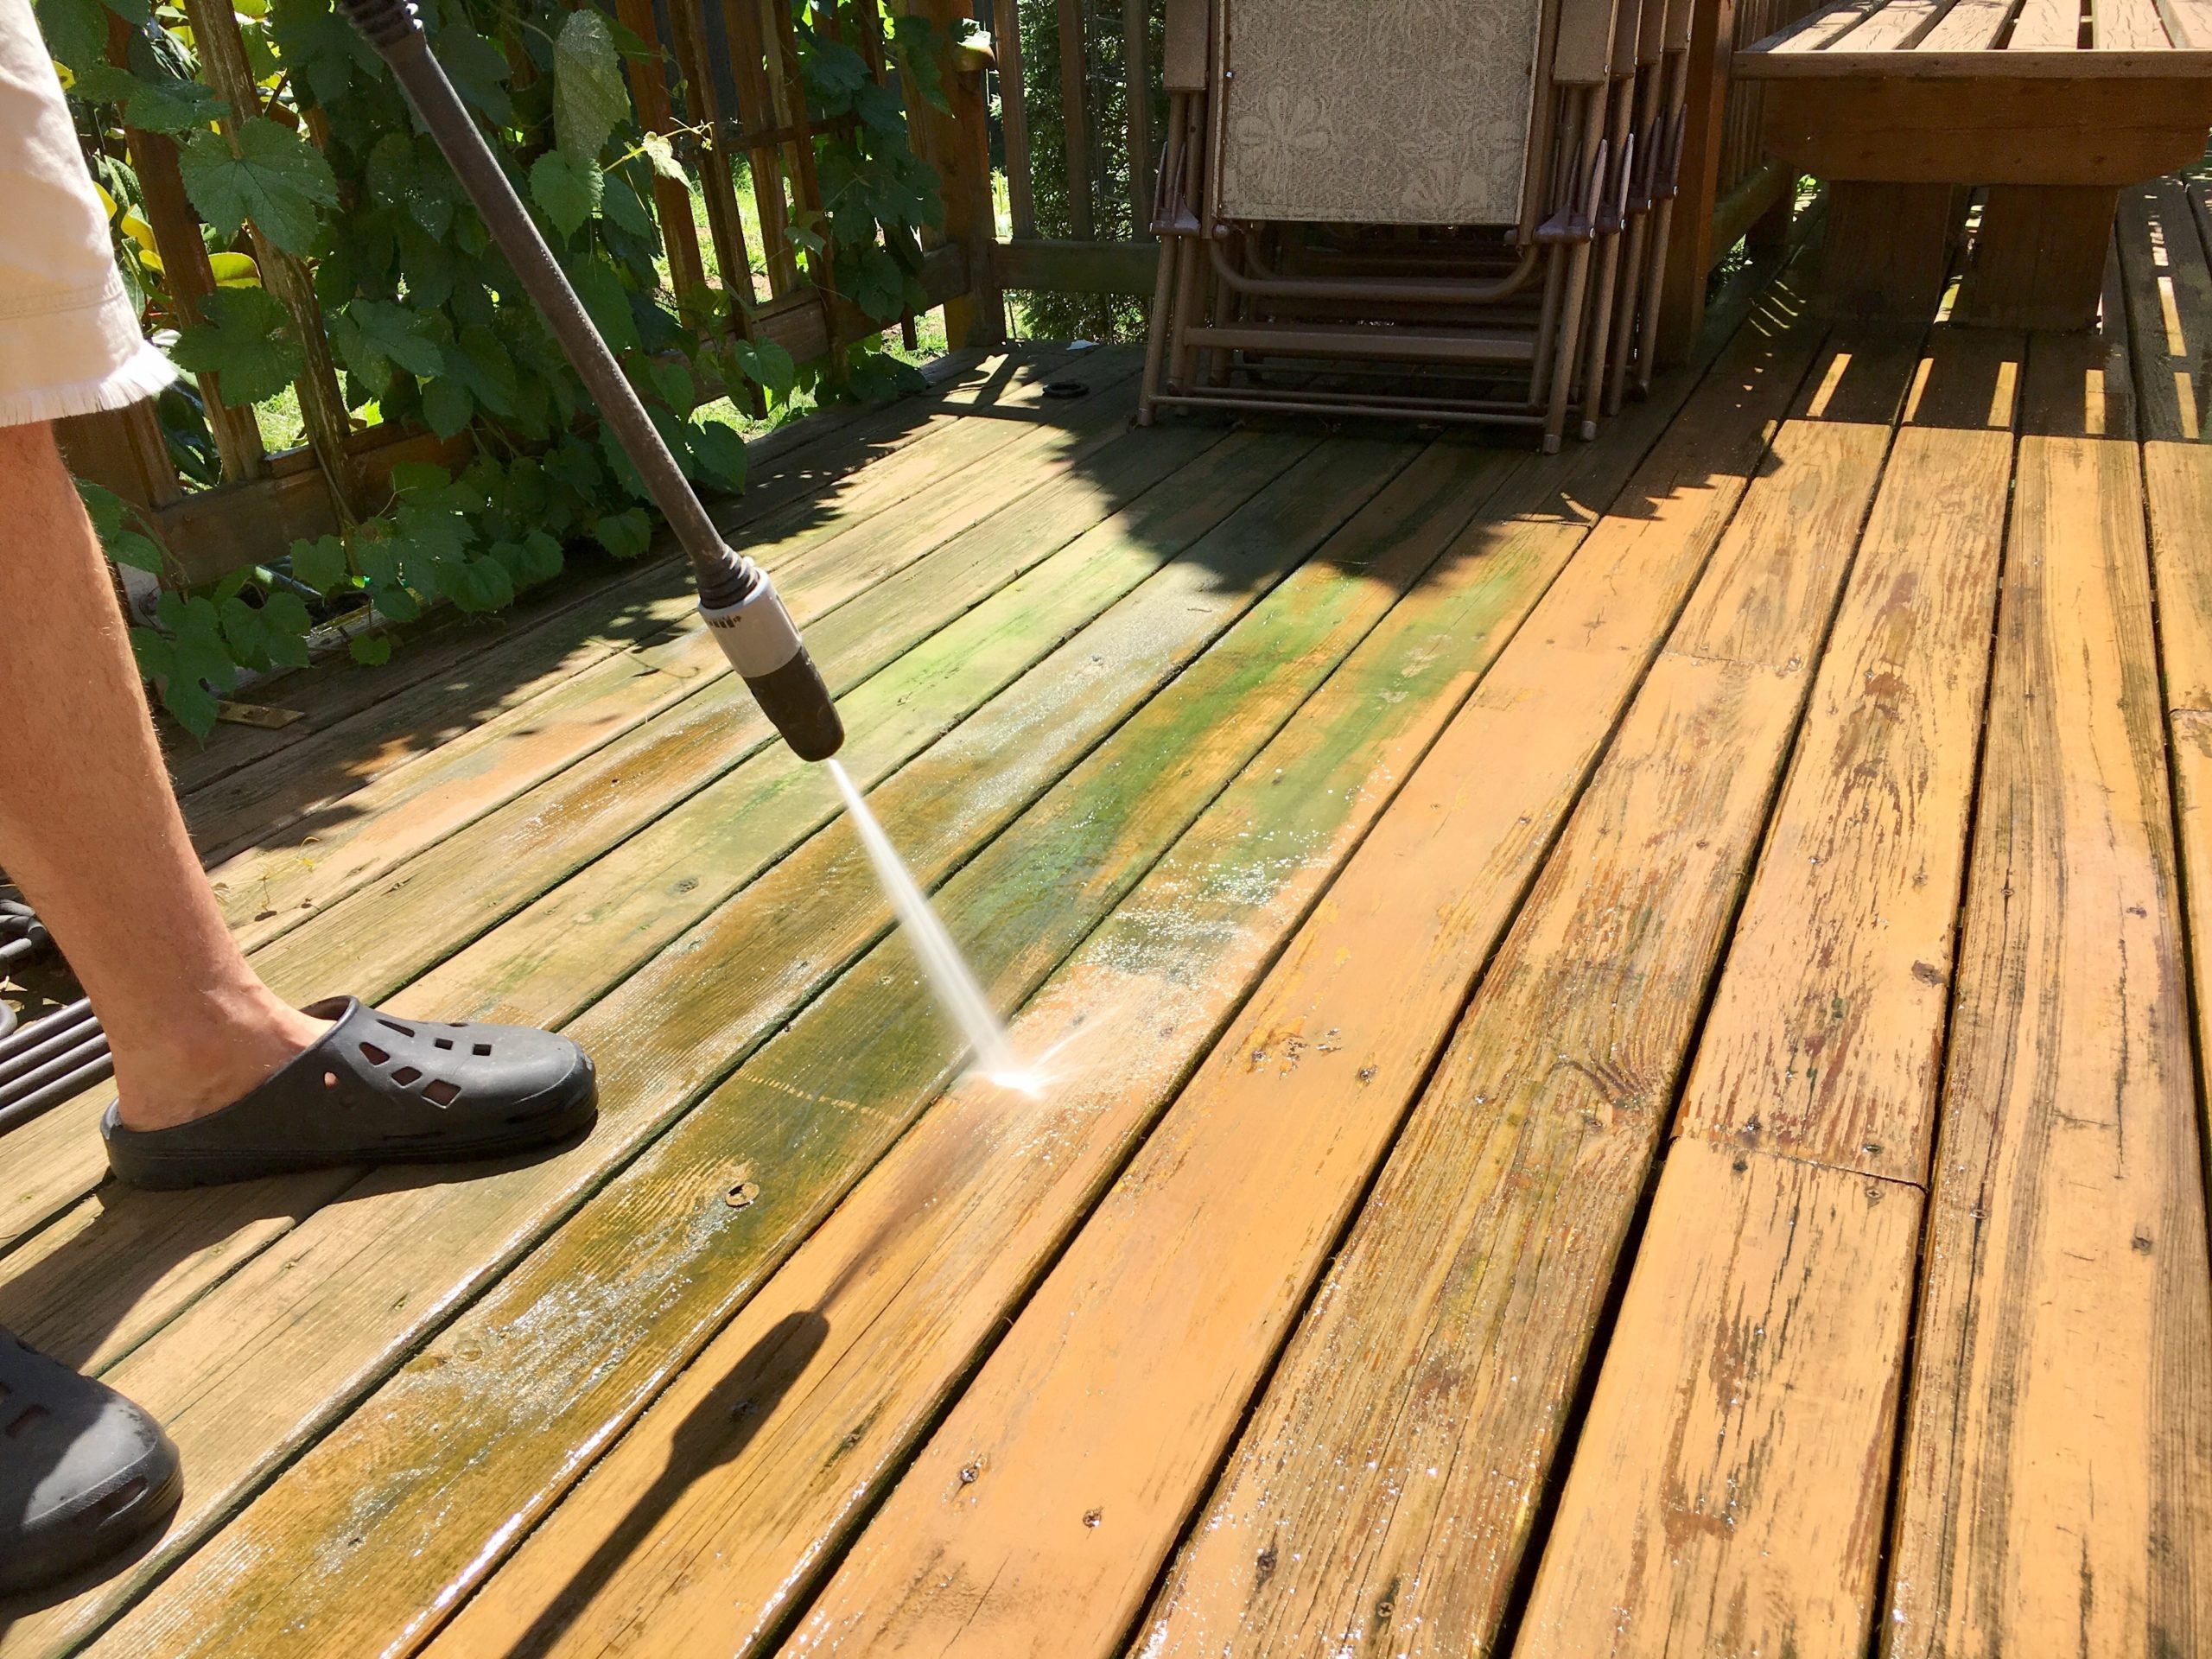 Homeowner power washing deck in the summertime.